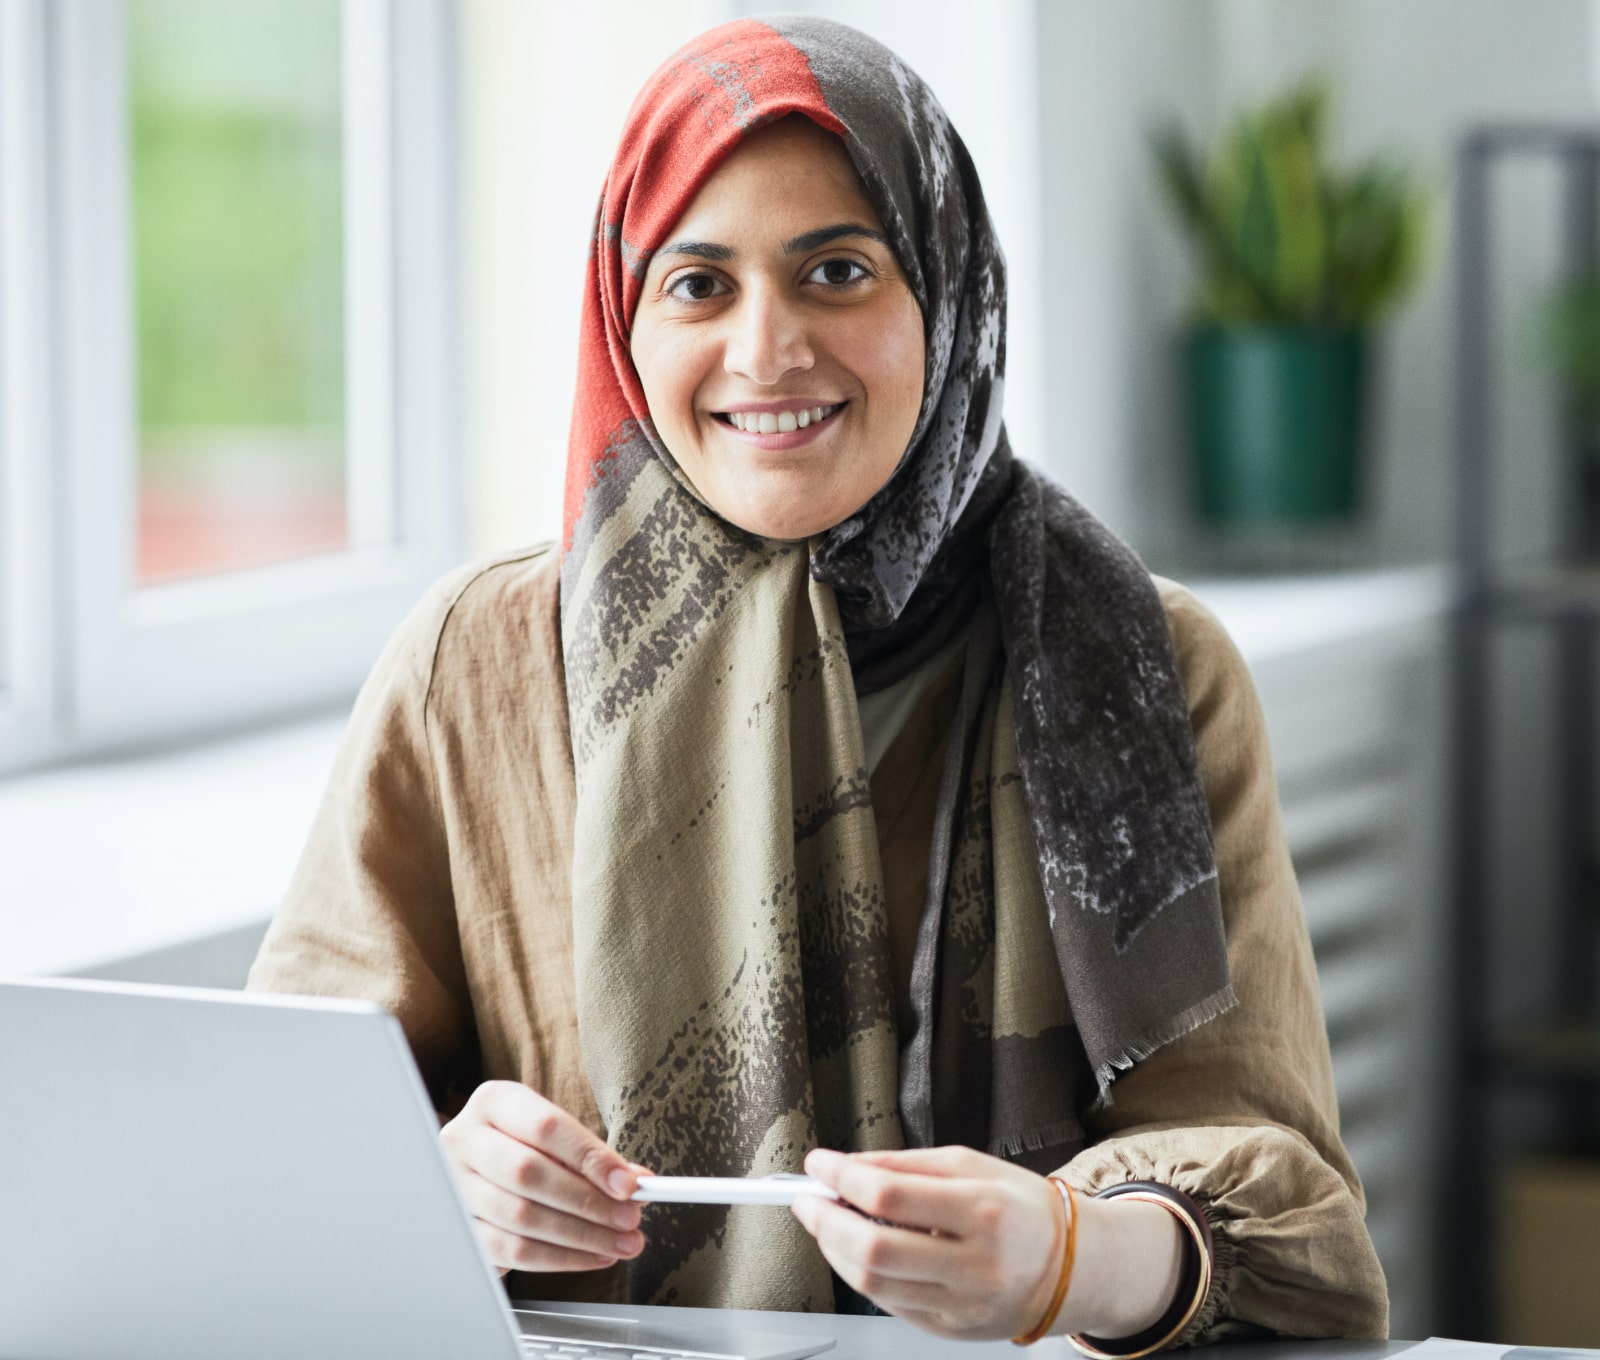 Smiling muslim women sitting at a desk with the laptop open